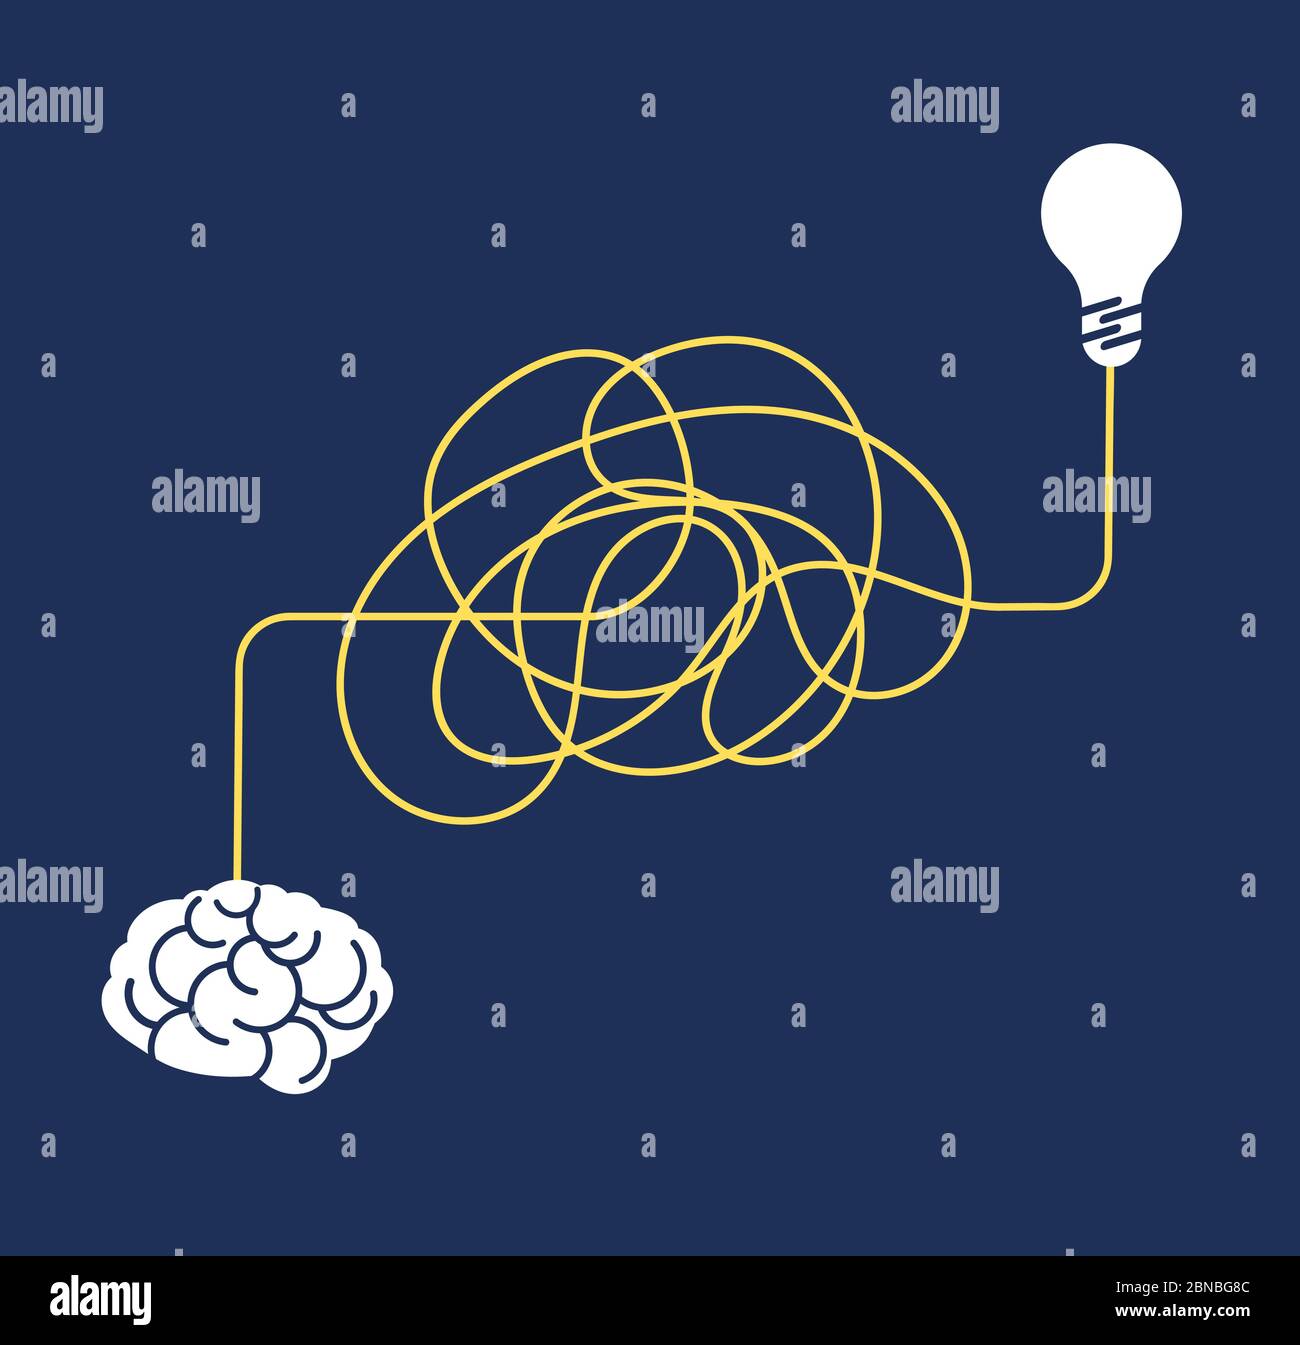 Messy complicated way. Confused process, chaos line symbol. Tangled scribble idea, insane brain vector concept. Way to mind and idea, line to brain illustration Stock Vector